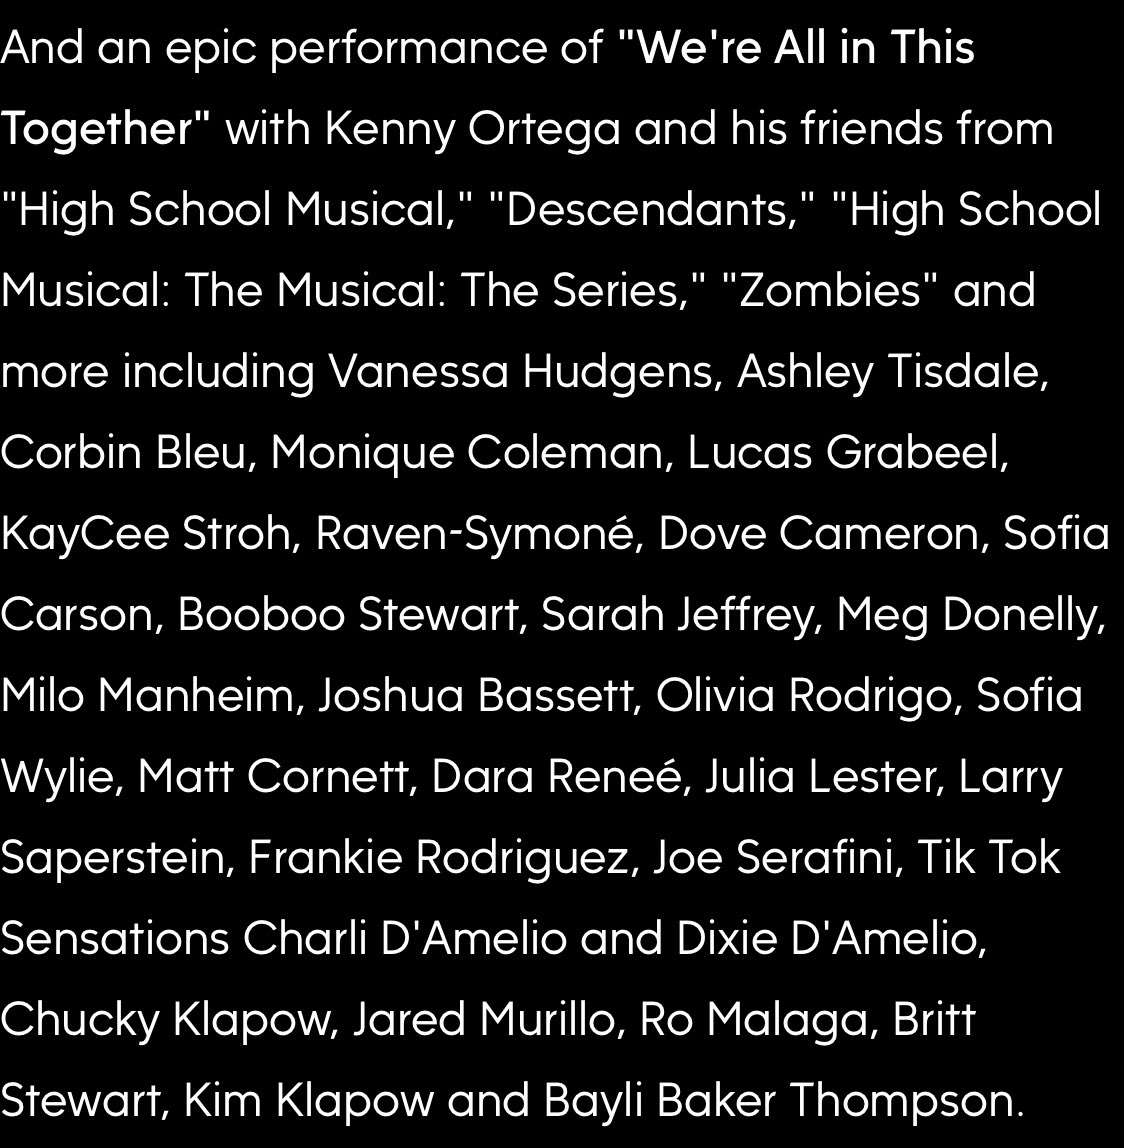 THE HSMTMTS CAST, THE OG HSM CAST, THE DESCENDANTS CAST, AND THE ZOMBIES CAST ARE ALL PERFORMING “WE’RE ALL IN THIS TOGETHER”???? THIS IS THE MASHUP OF THE YEAR NOBODY MOVE!!!!